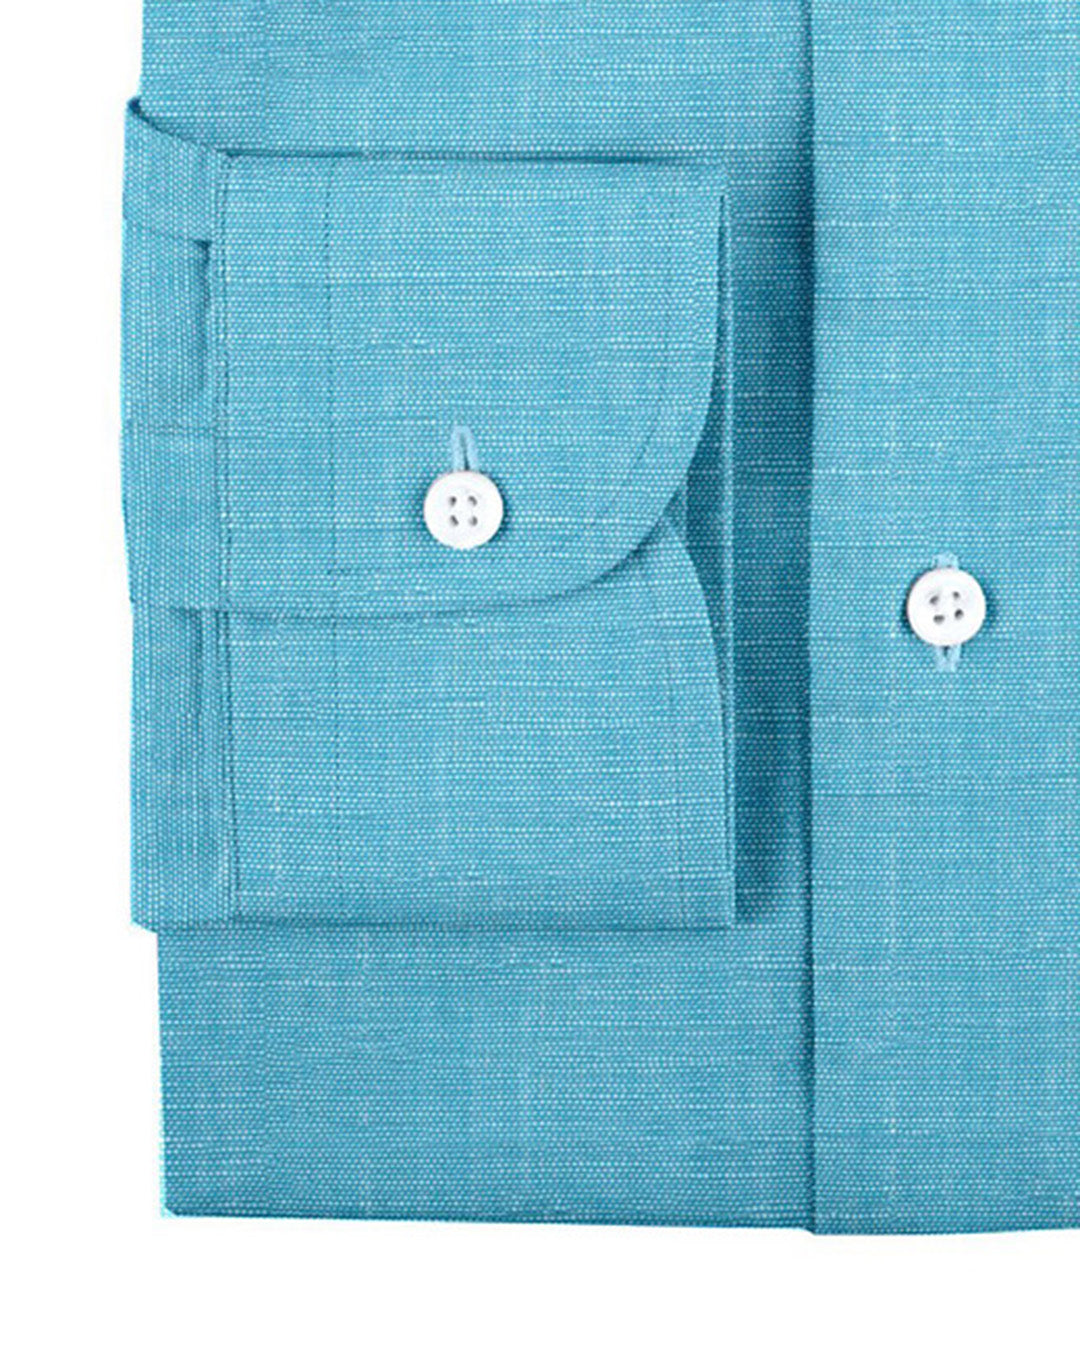 Cuff of the custom linen shirt for men in sky blue by Luxire Clothing